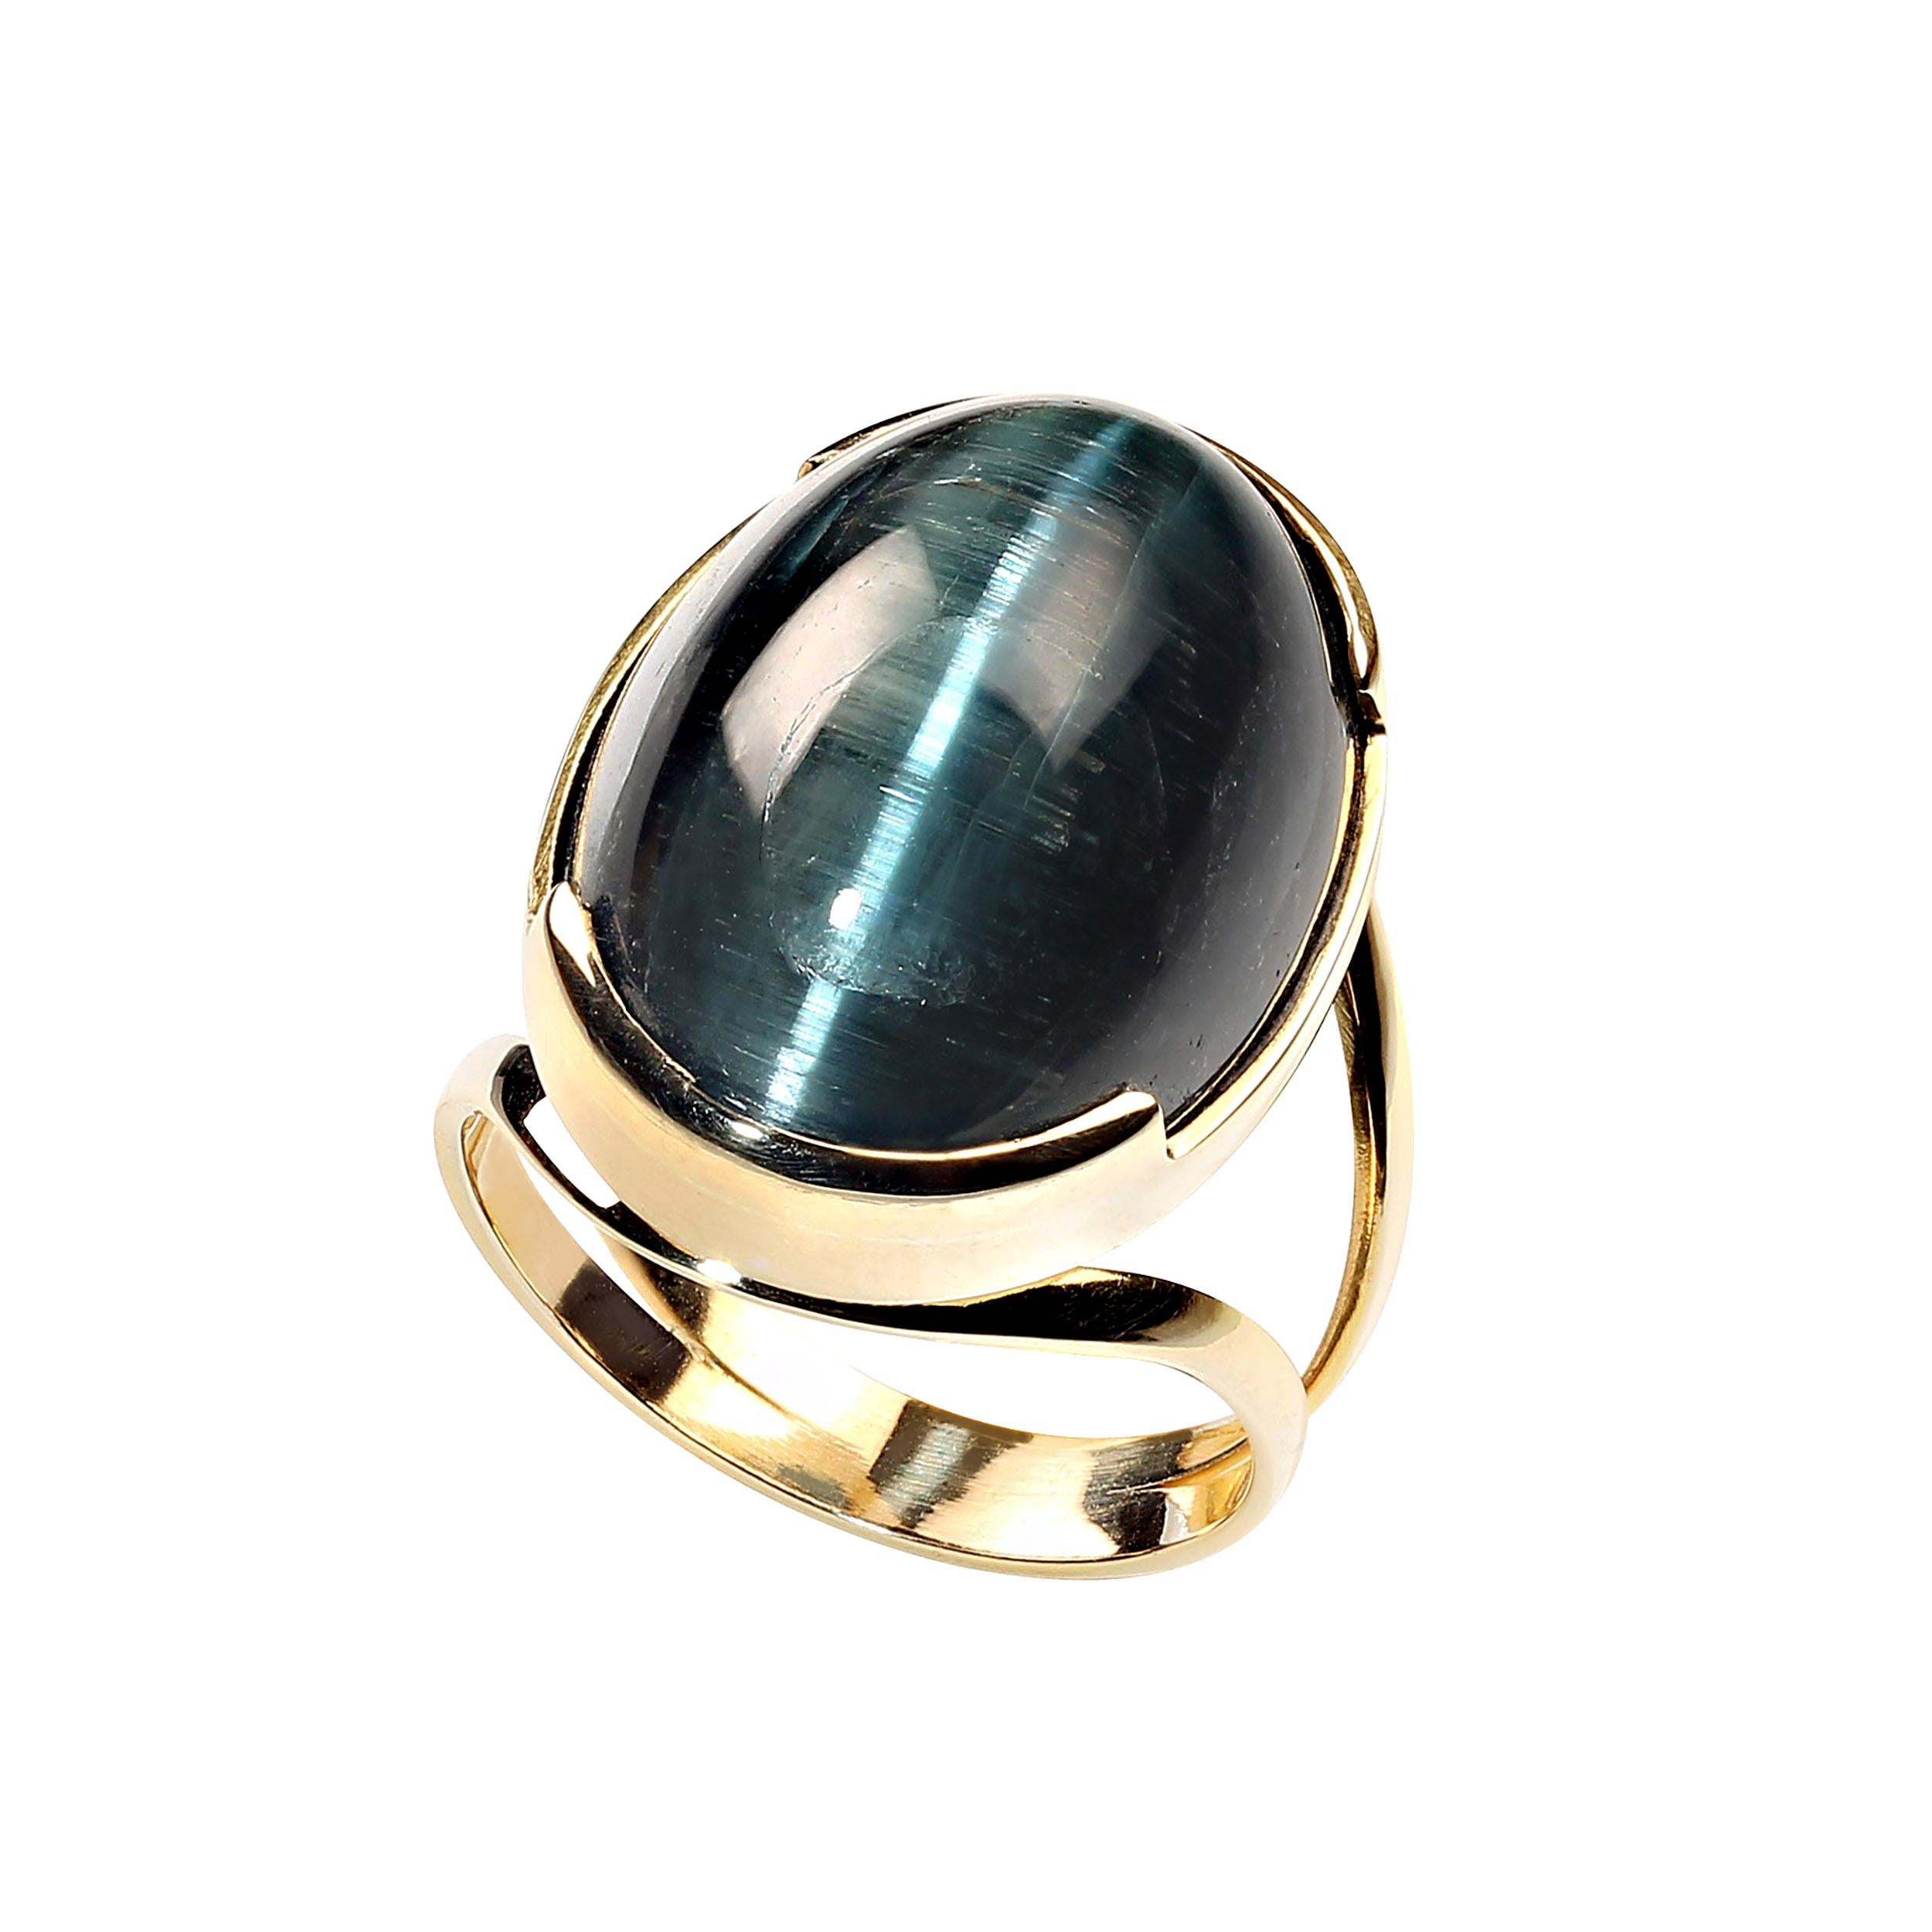 AJD Magnificent 24 Carat Blue-Green Cat's Eye Tourmaline in 18KT Gold Ring In New Condition For Sale In Raleigh, NC